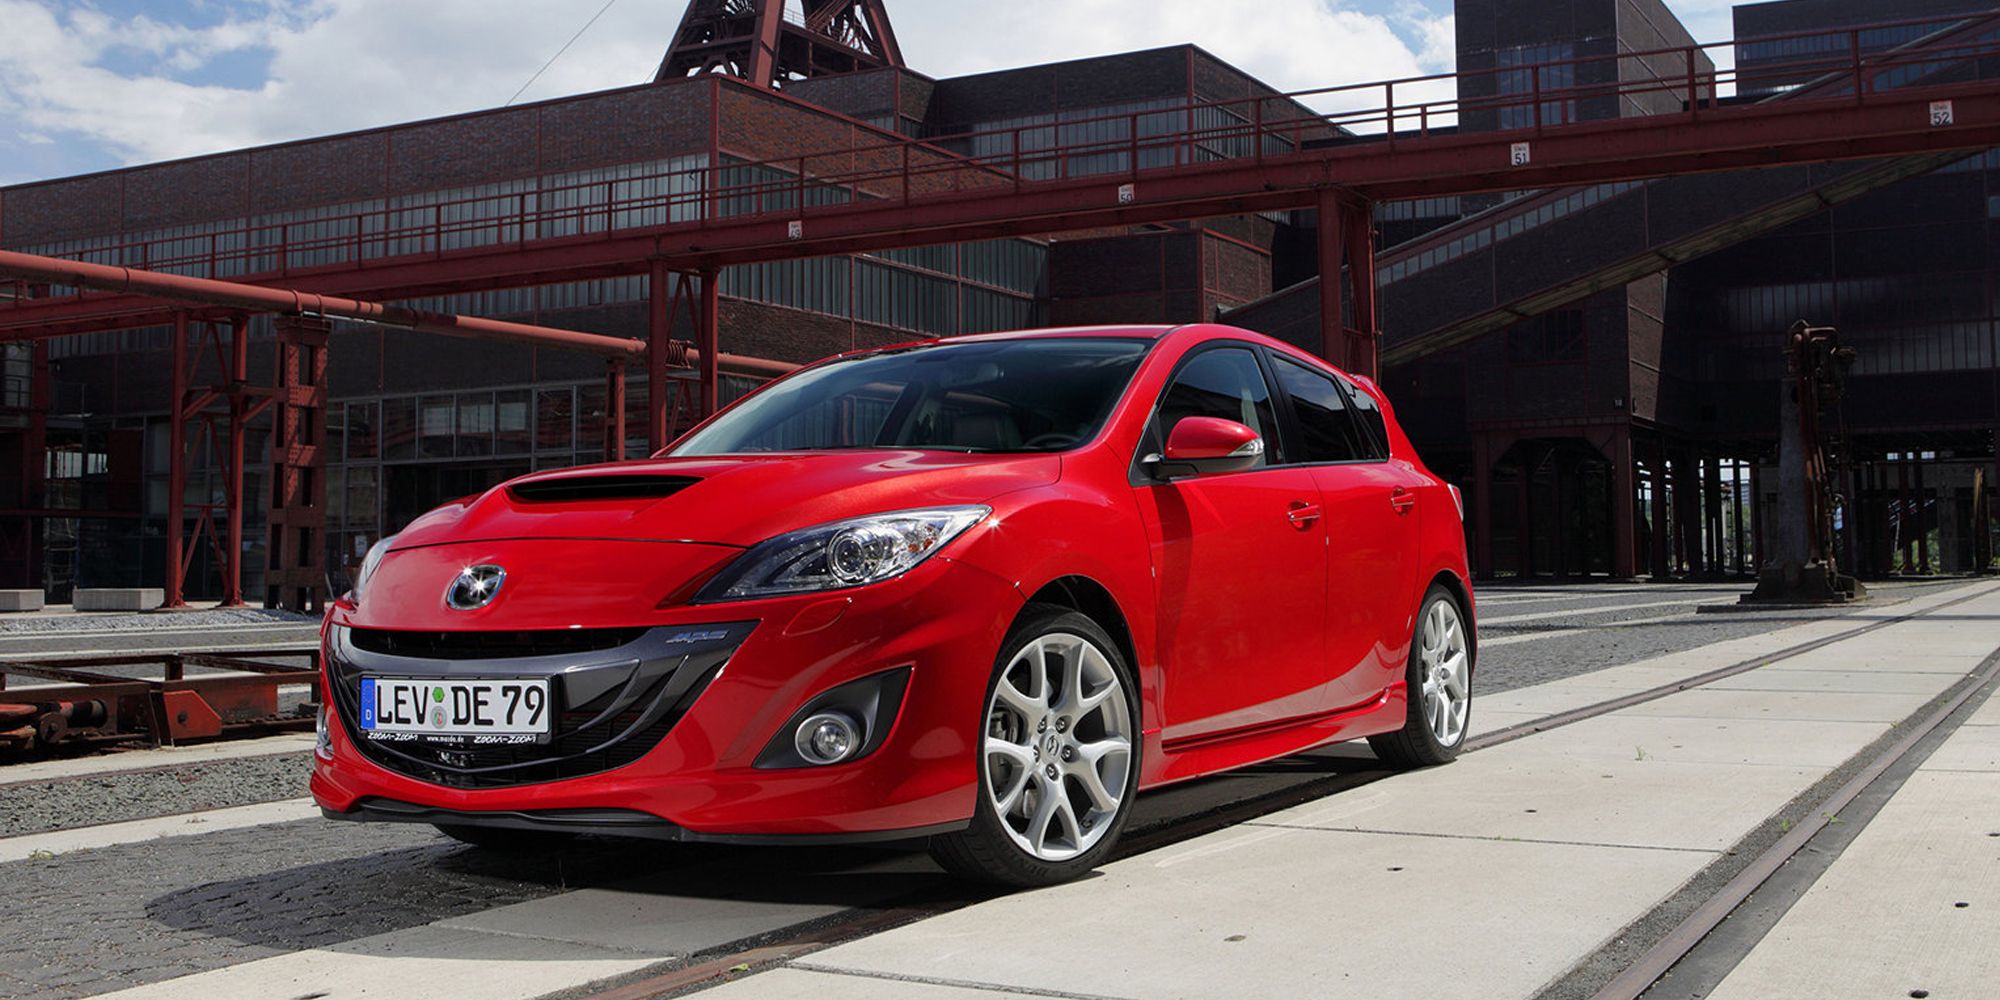 Front 3/4 view of the Mazdaspeed 3, left side